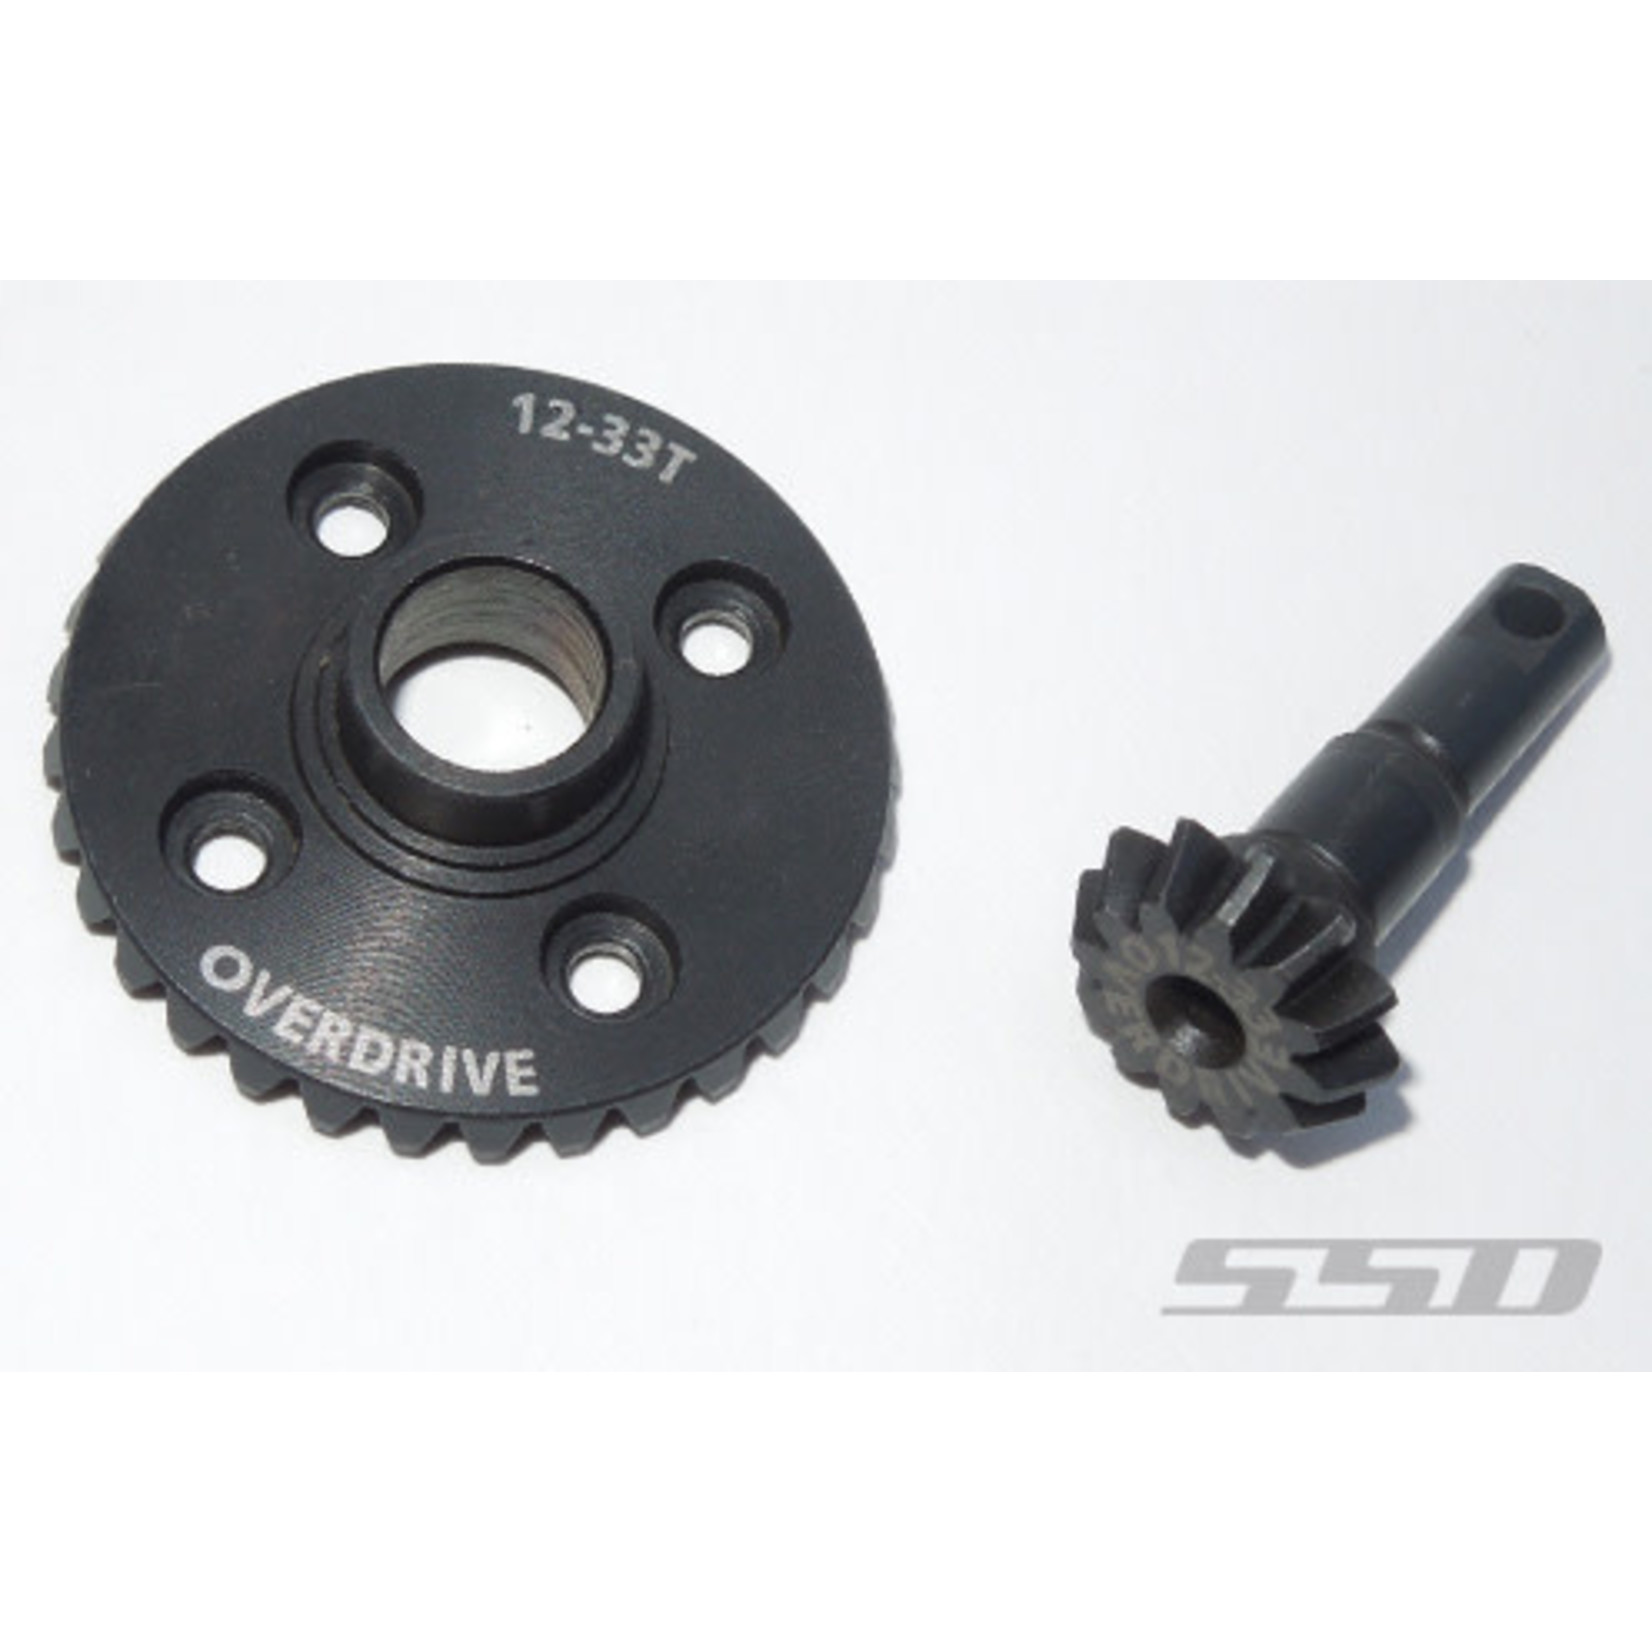 SSD RC Overdrive 12T/33T Axle Gear Set for TRX4